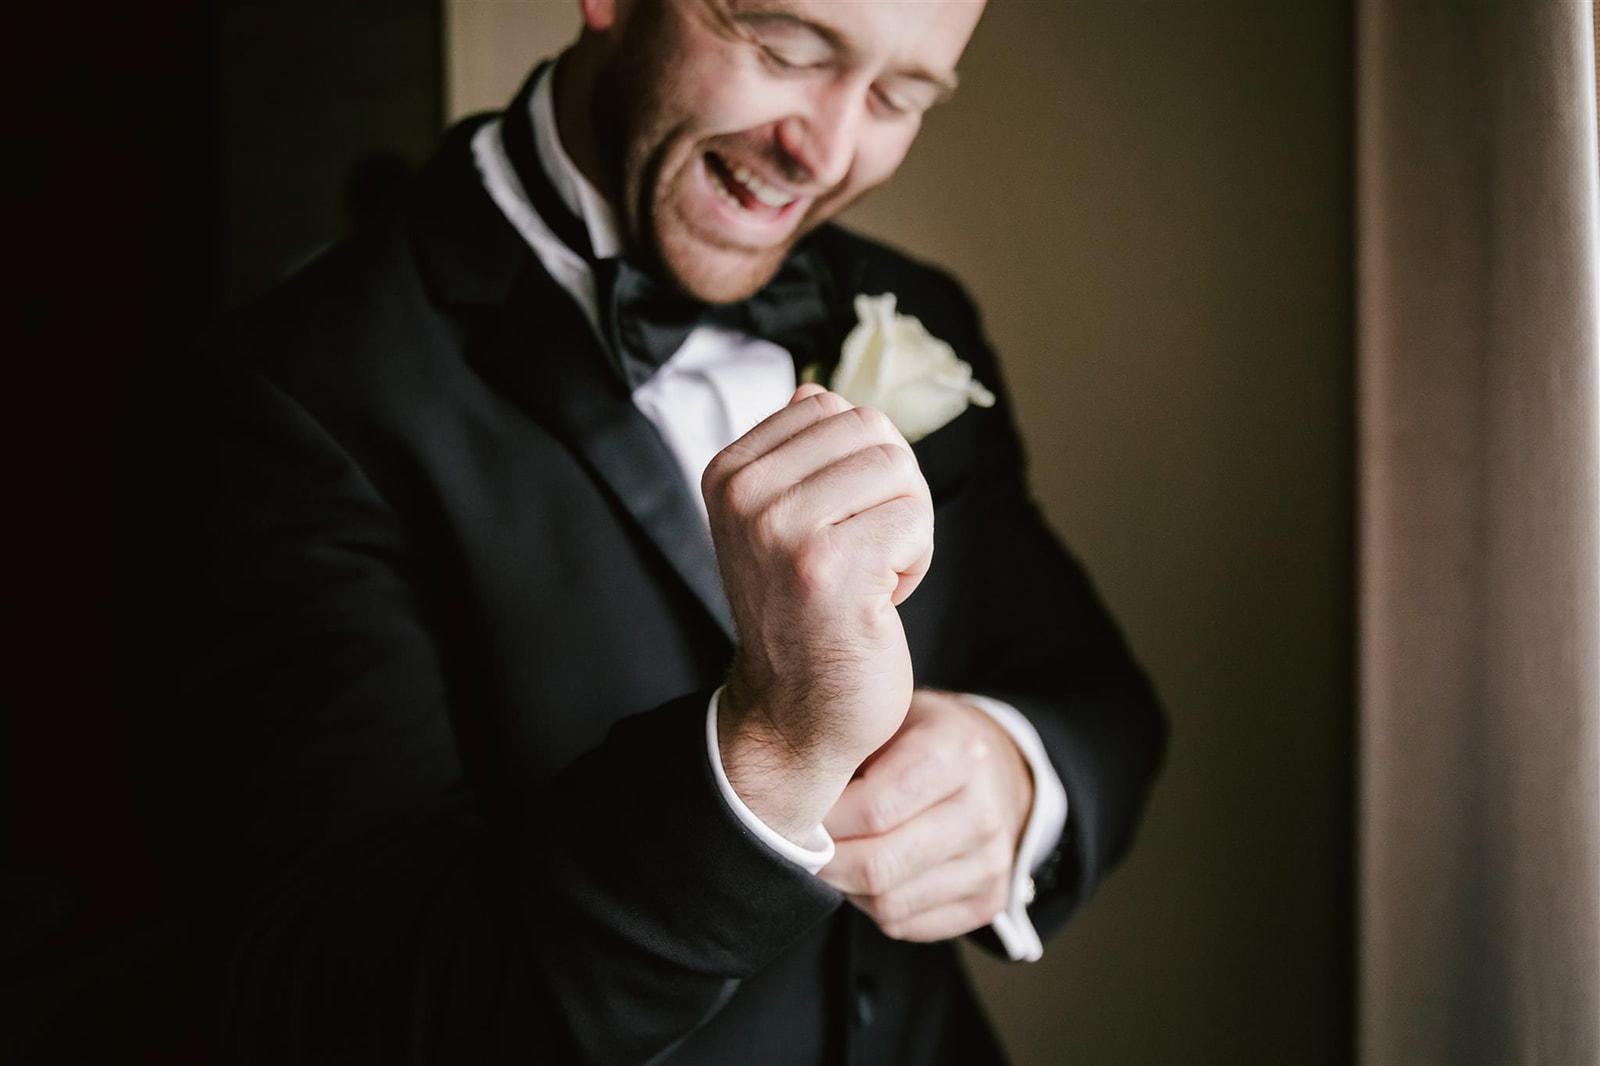 As the groom prepares for the wedding, he meticulously adjusts his cufflinks, adding a final touch of elegance.